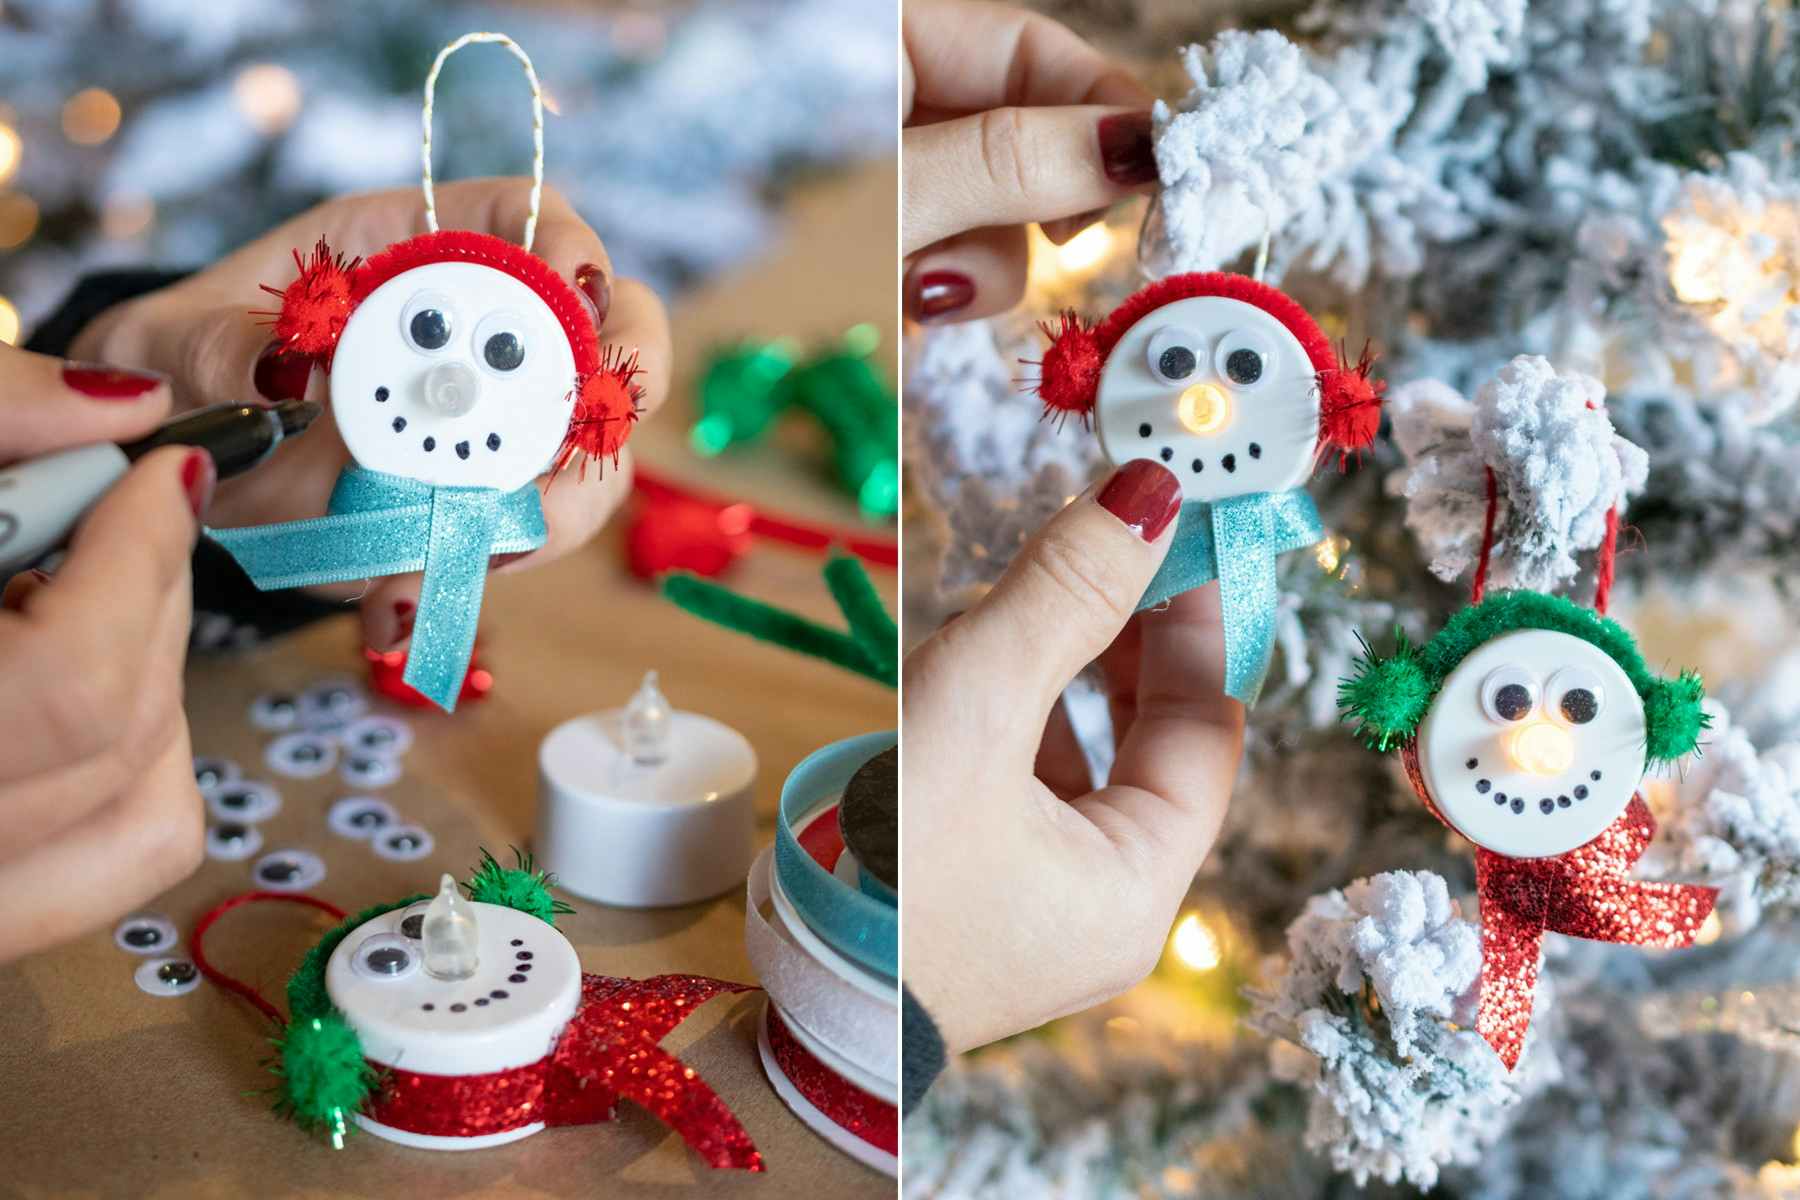 A person making little snowmen out of no flame tea light candles and hanging them on a Christmas tree.